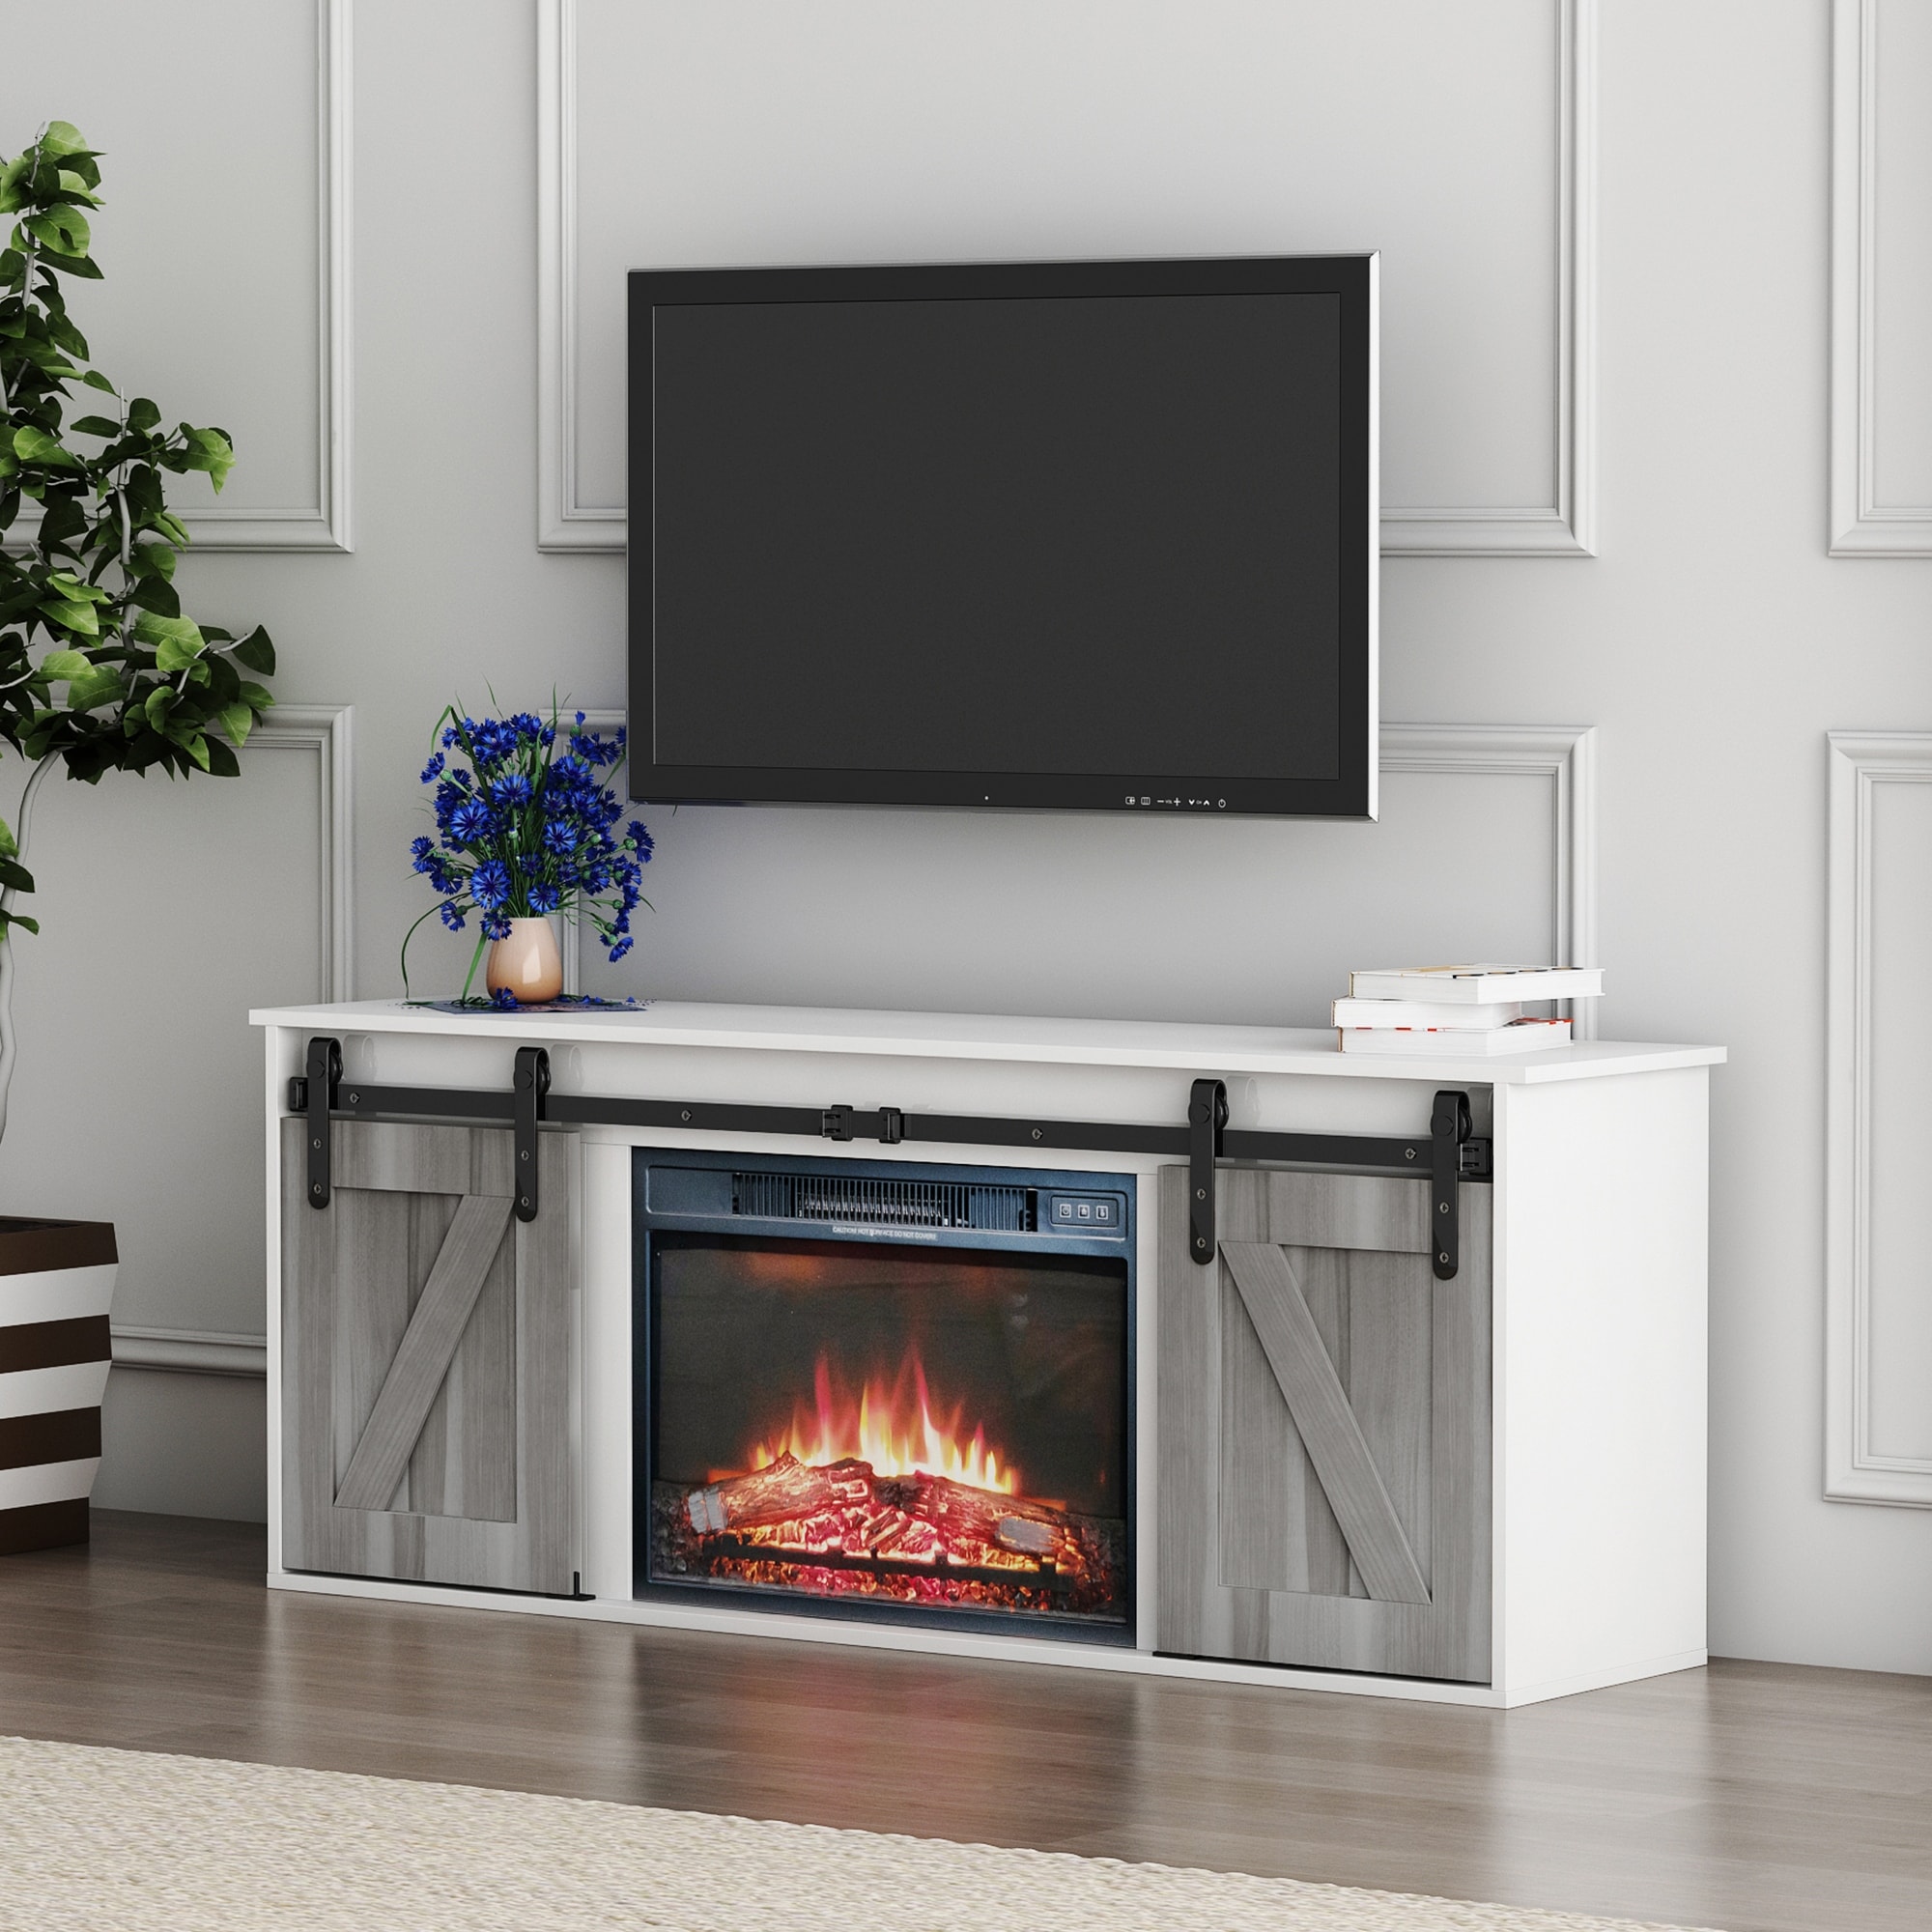 The television cabinet with an electronic fireplace